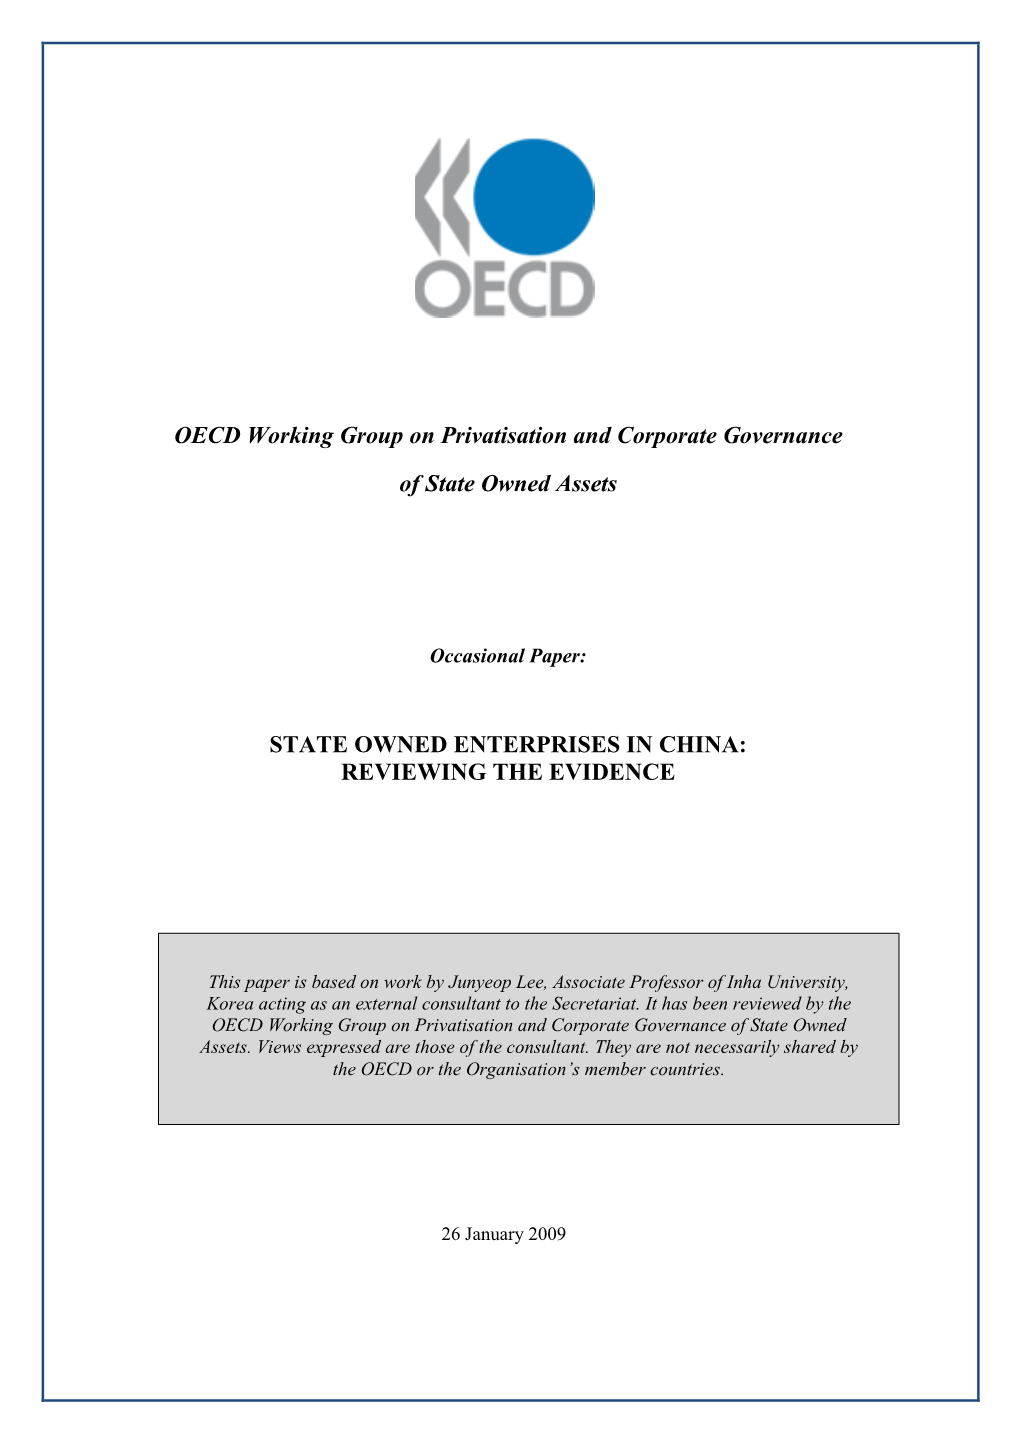 State Owned Enterprises in China: Reviewing the Evidence